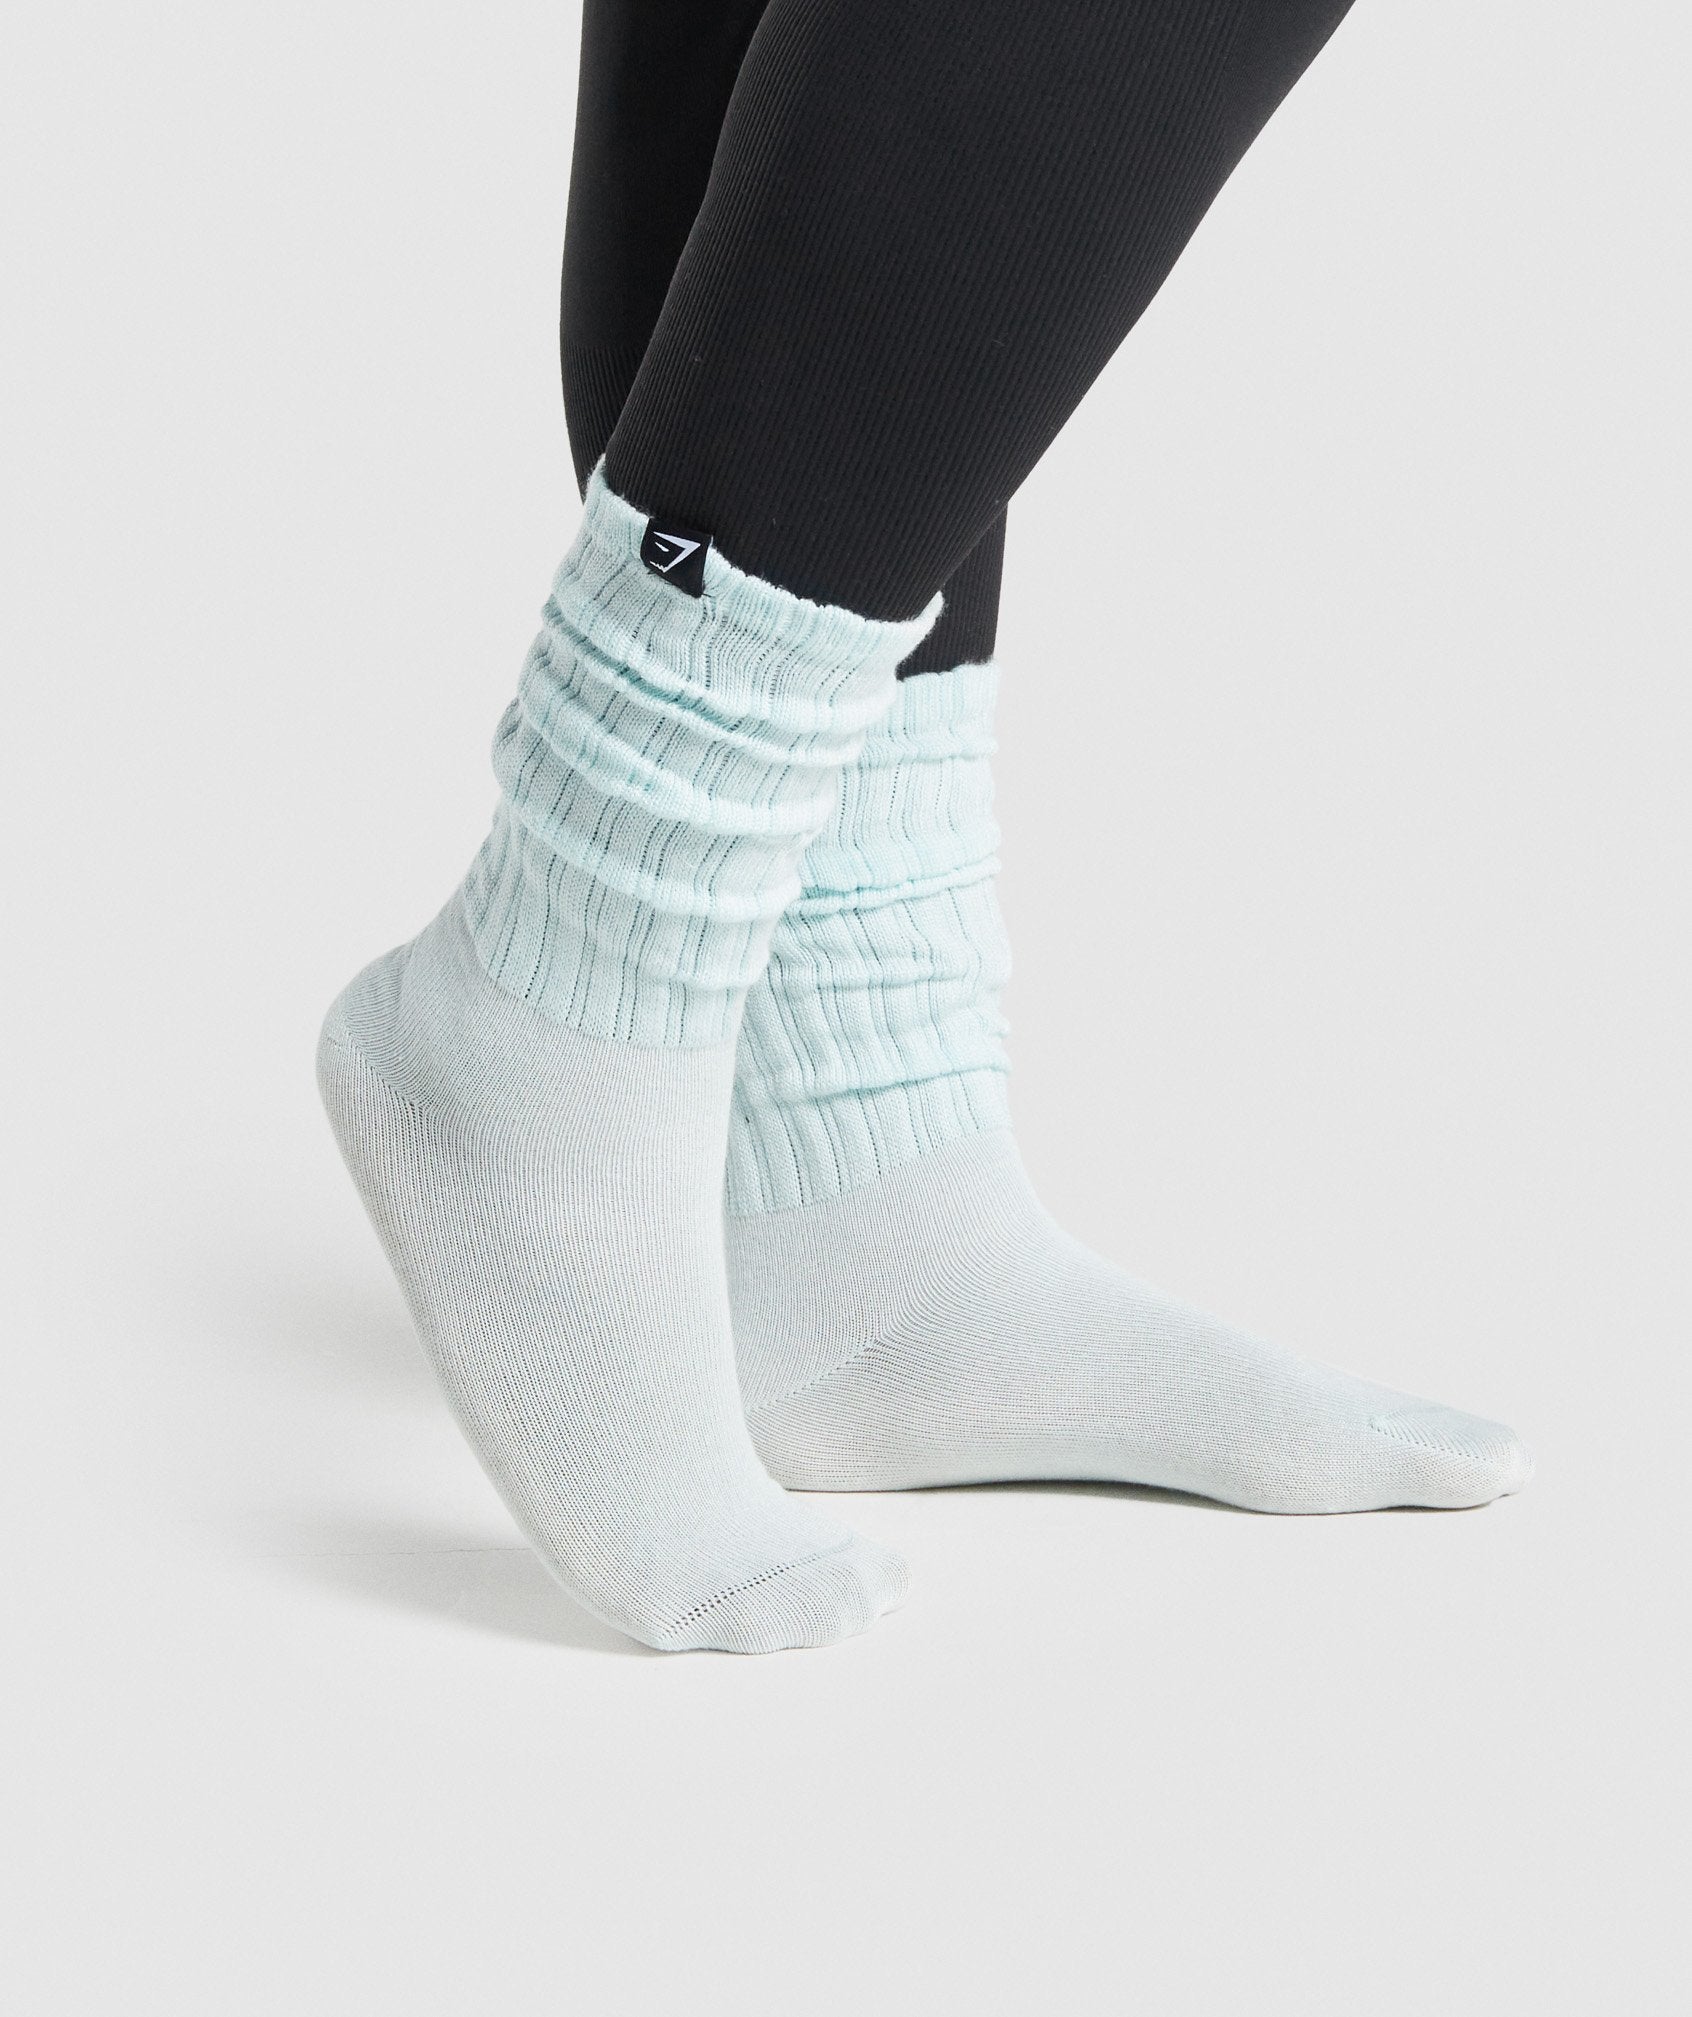 Comfy Rest Day Socks in Light Green - view 1